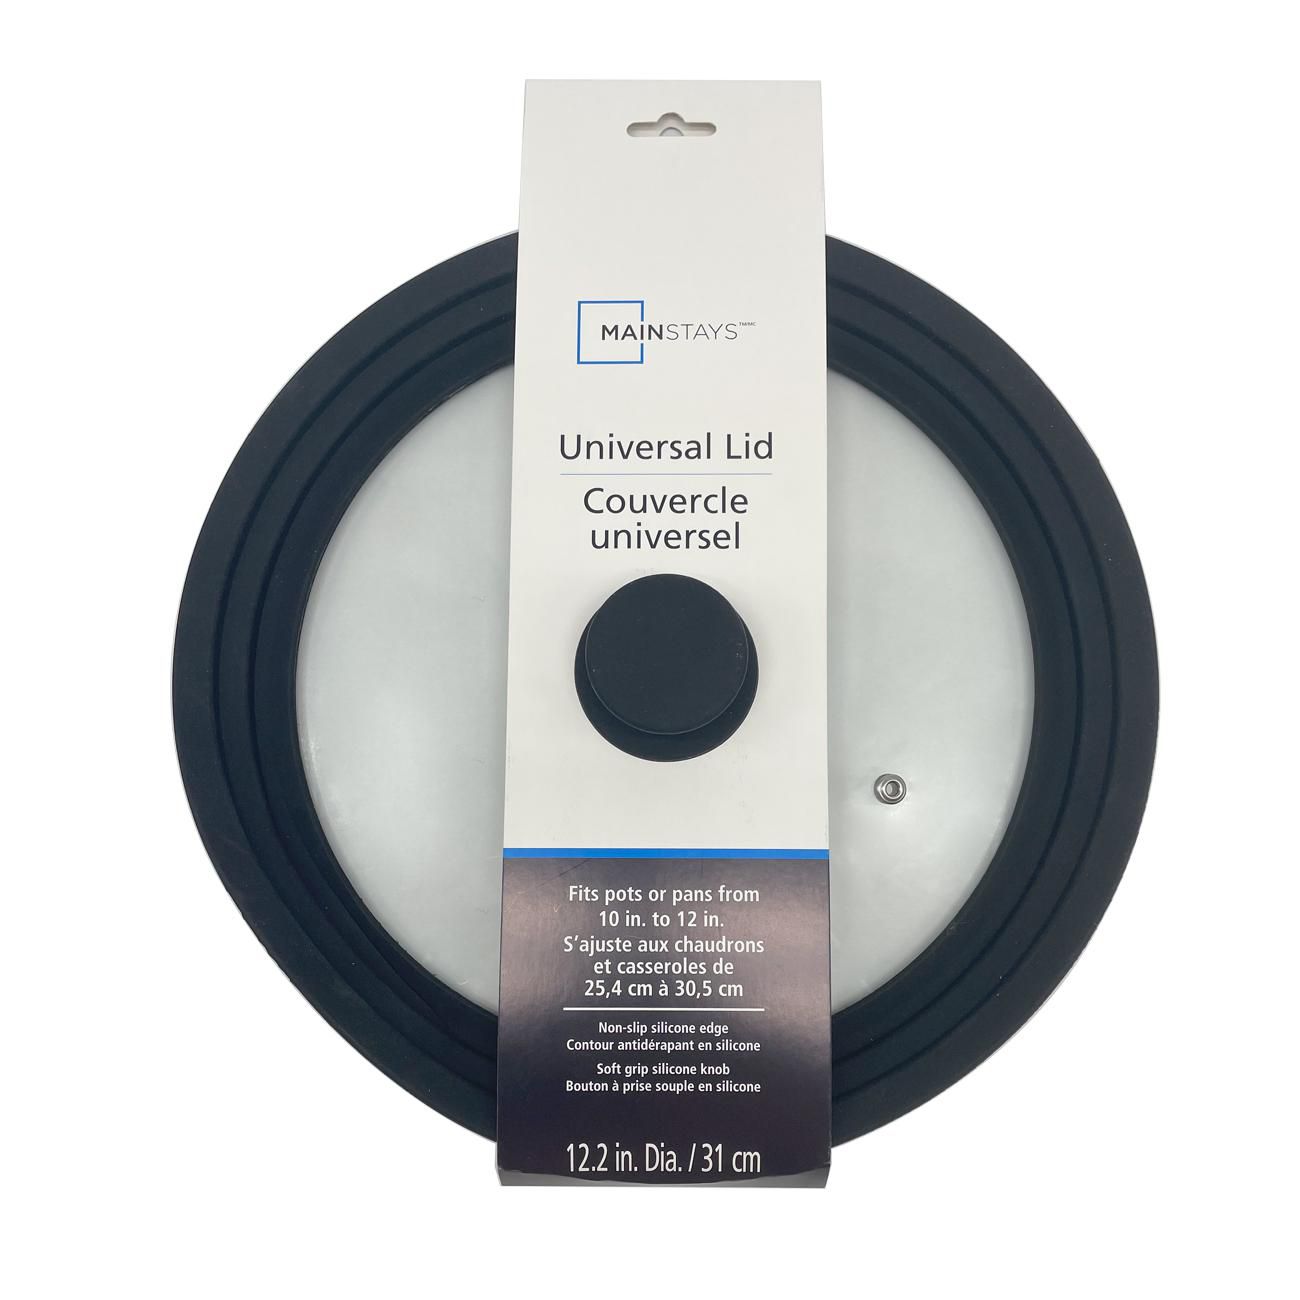 Mainstays Universal Lid for Pots, Pans, and Skillets, Mainstays